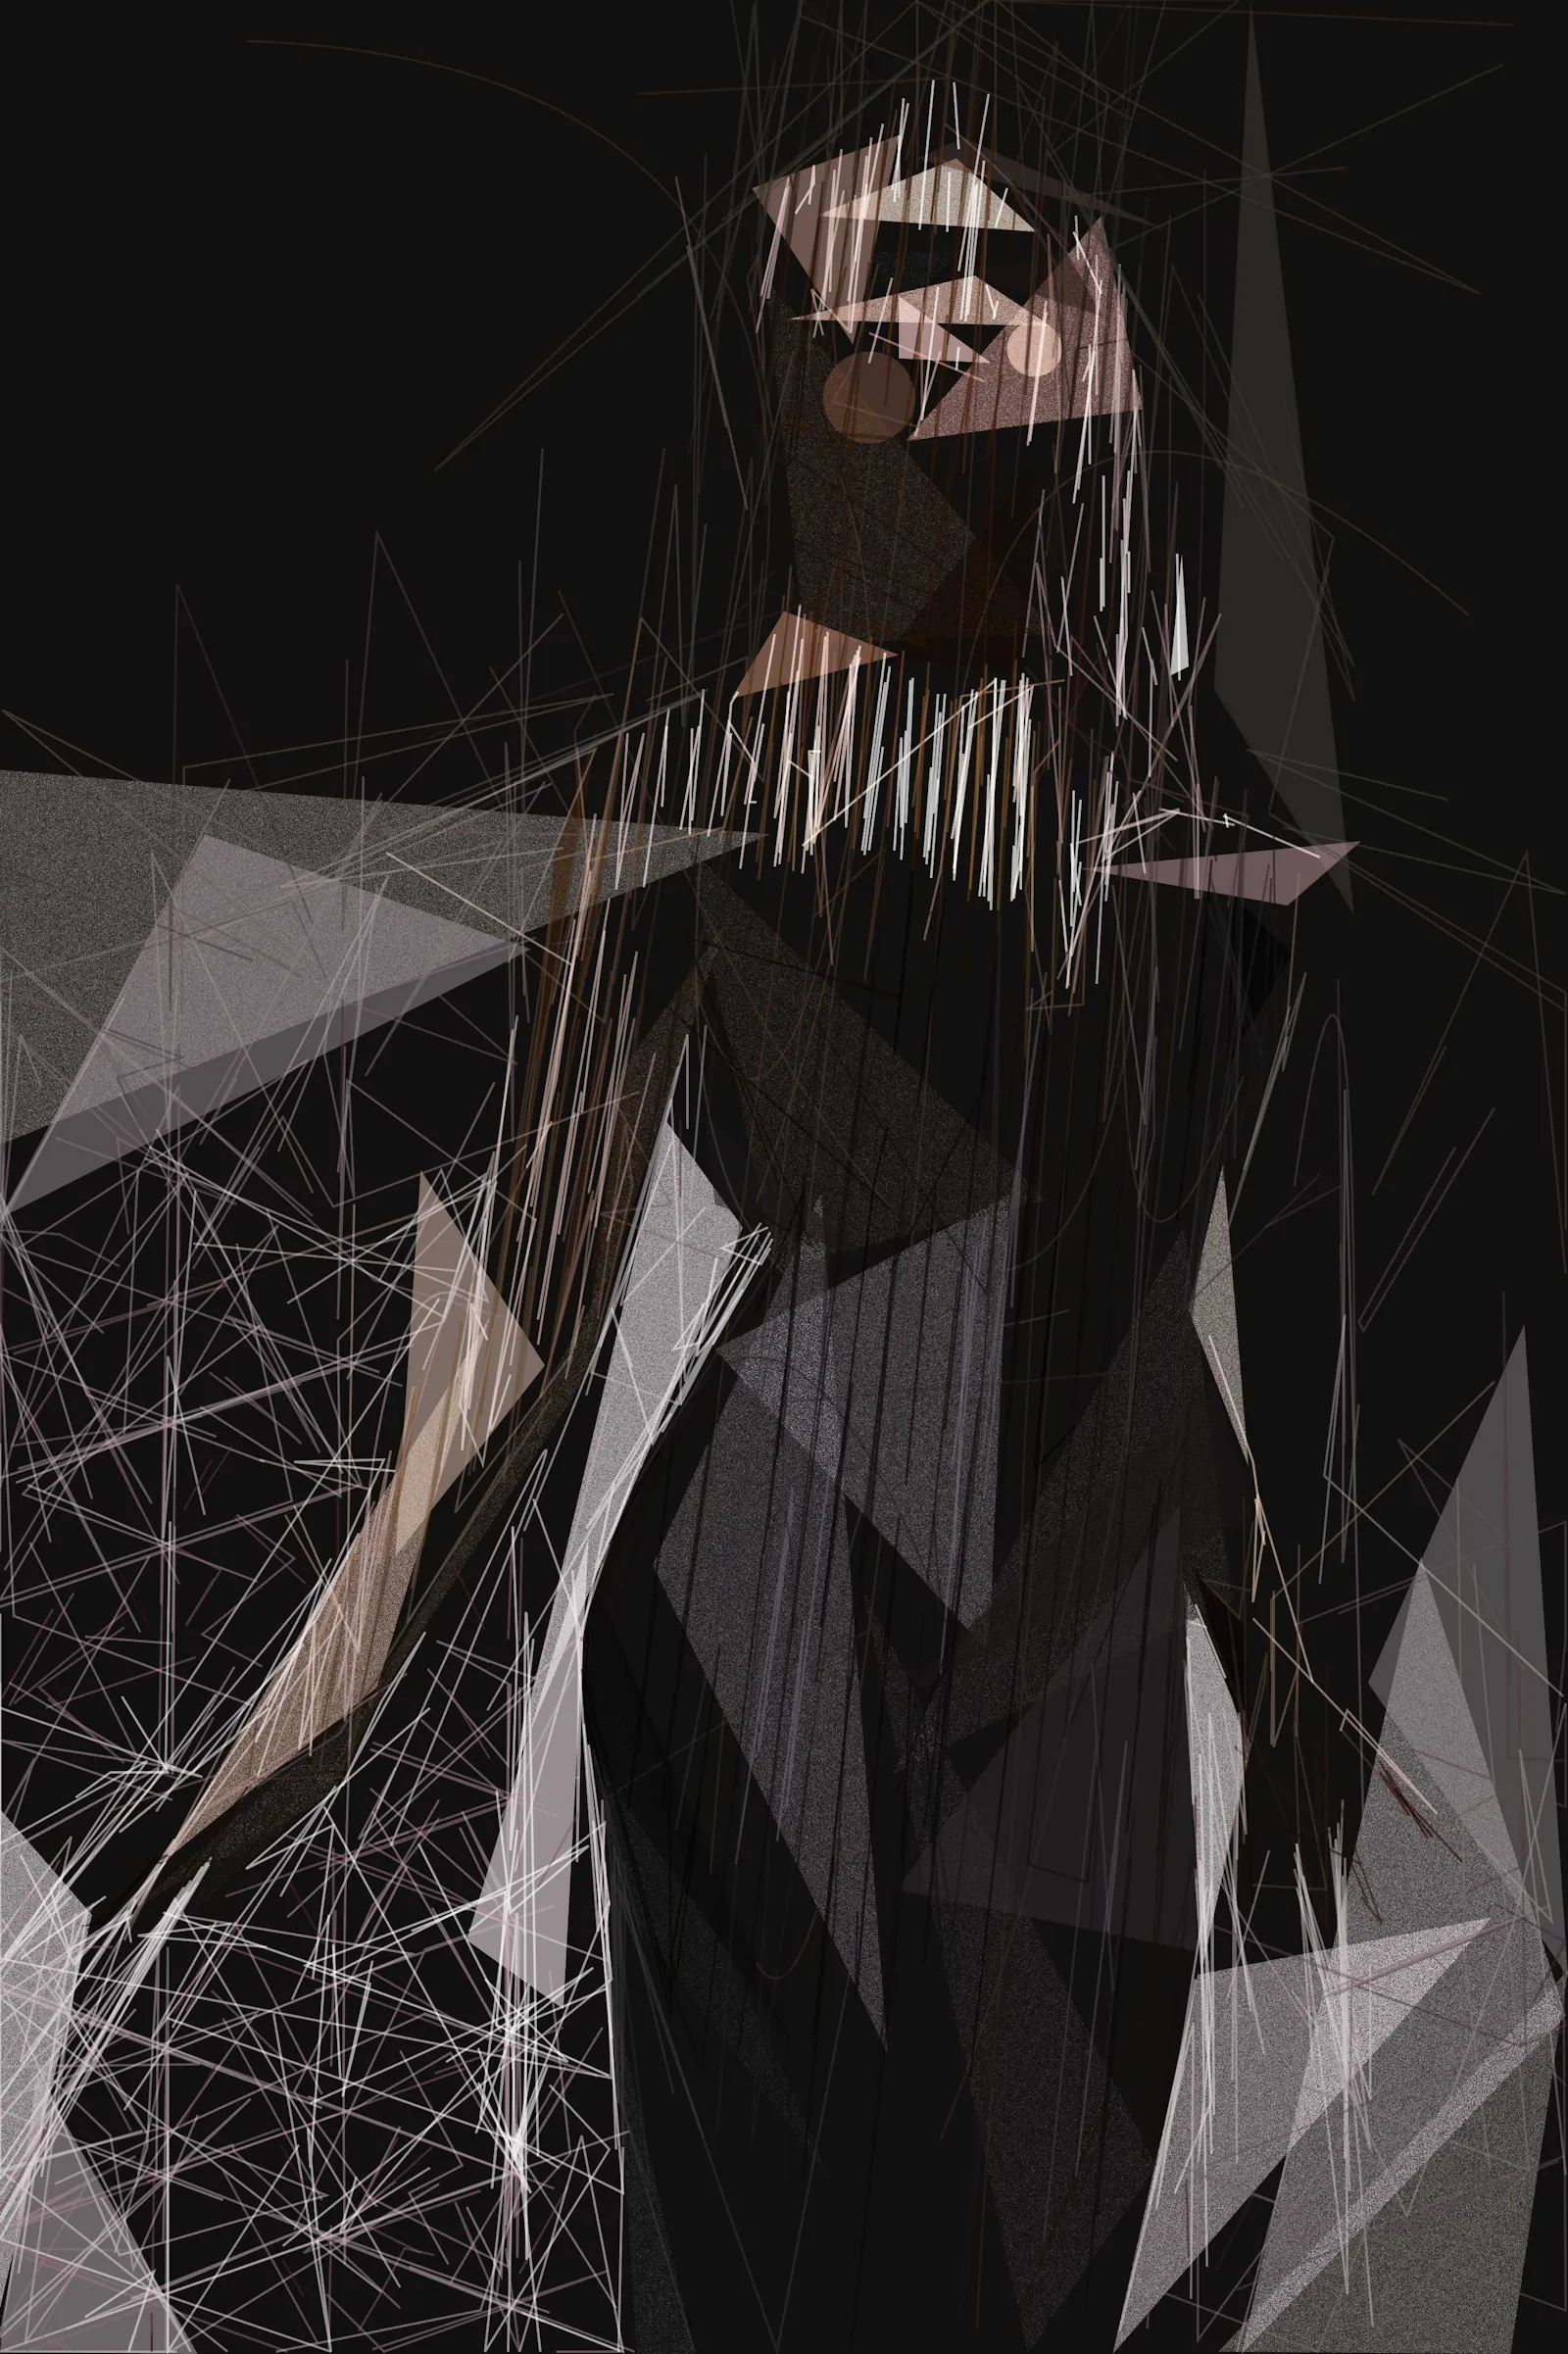 A sharp woman made out of sharp, slightly skewed lines.